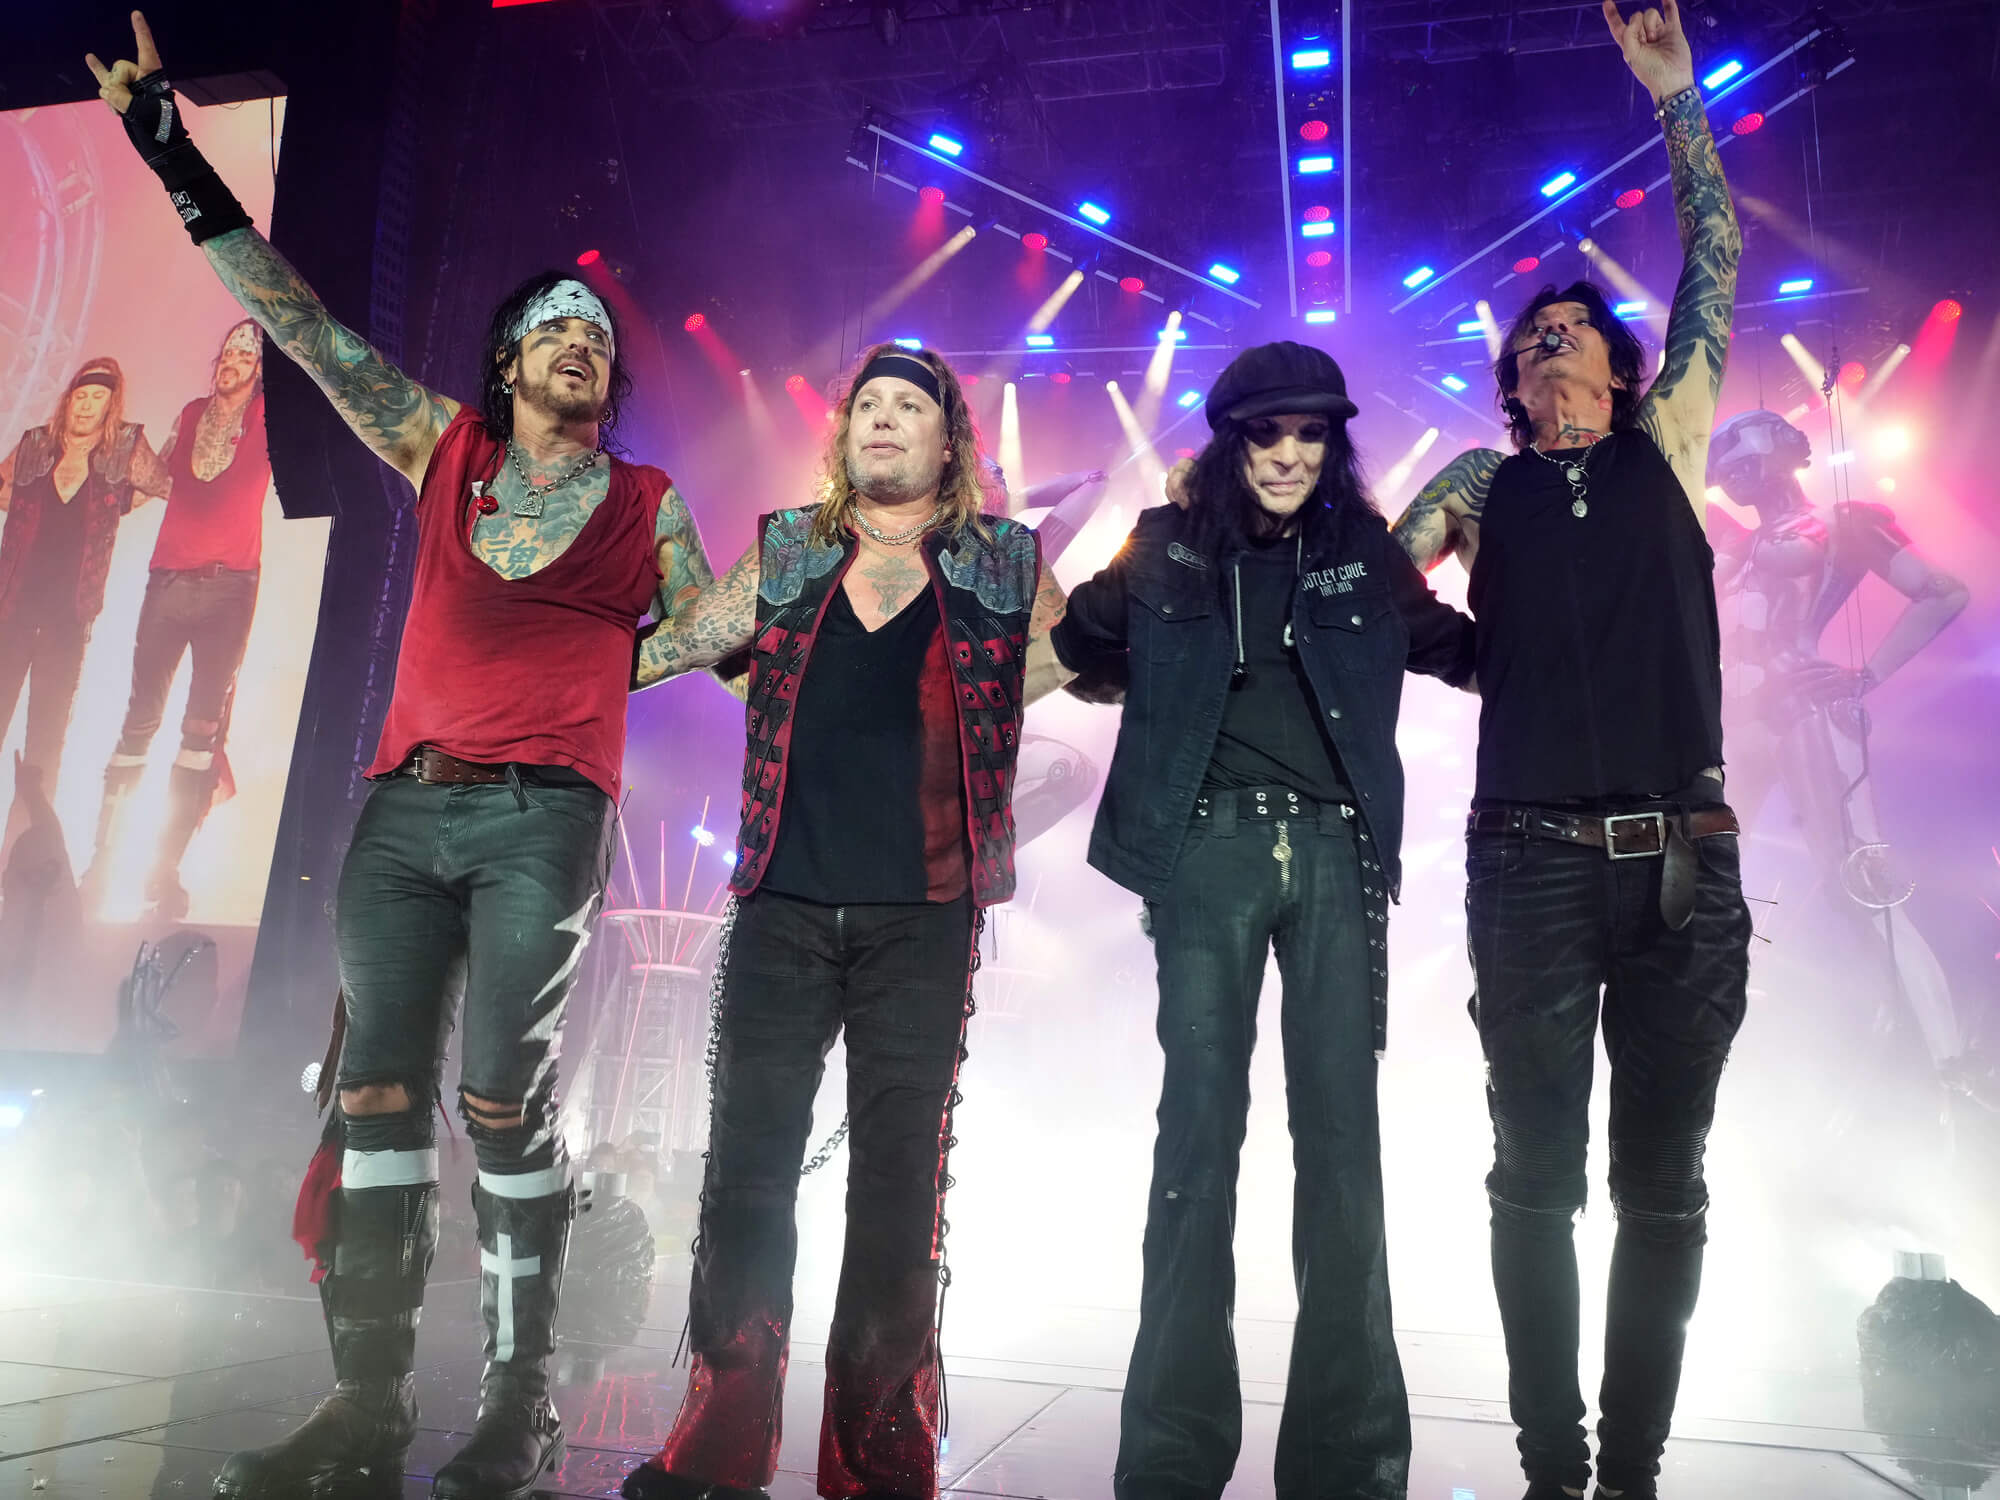 Nikki Sixx, Vince Neil, Mick Mars and Tommy Lee of Mötley Crüe perform onstage